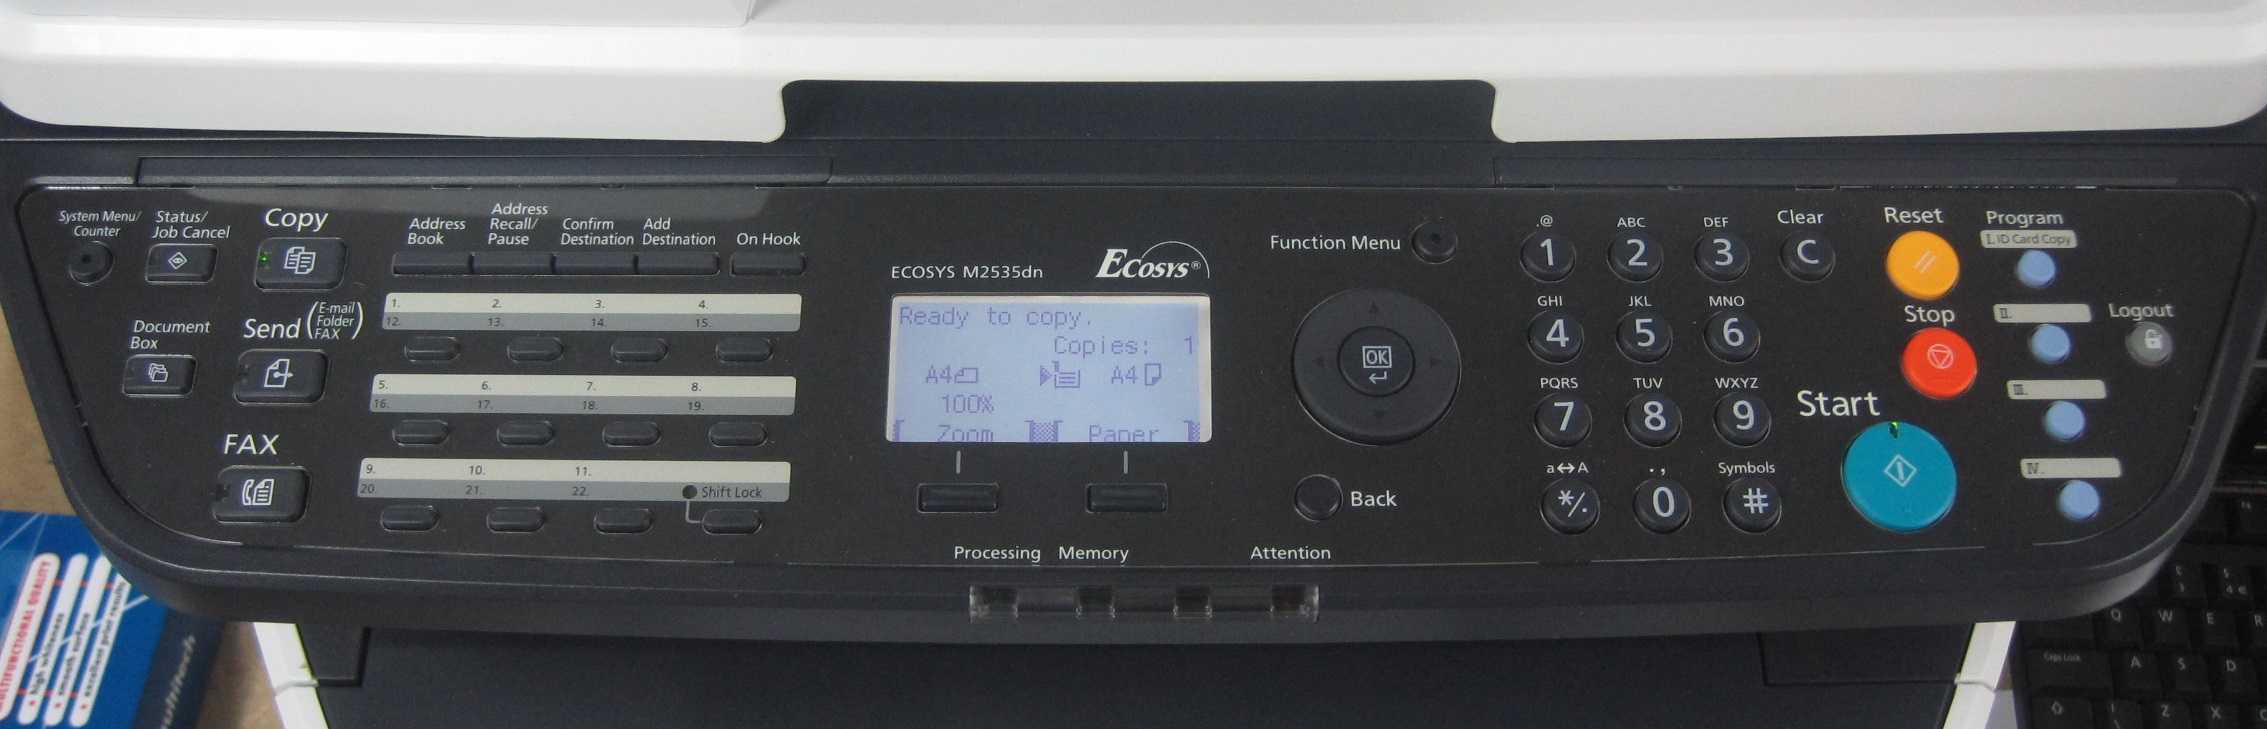 Ecosys m2040dn driver